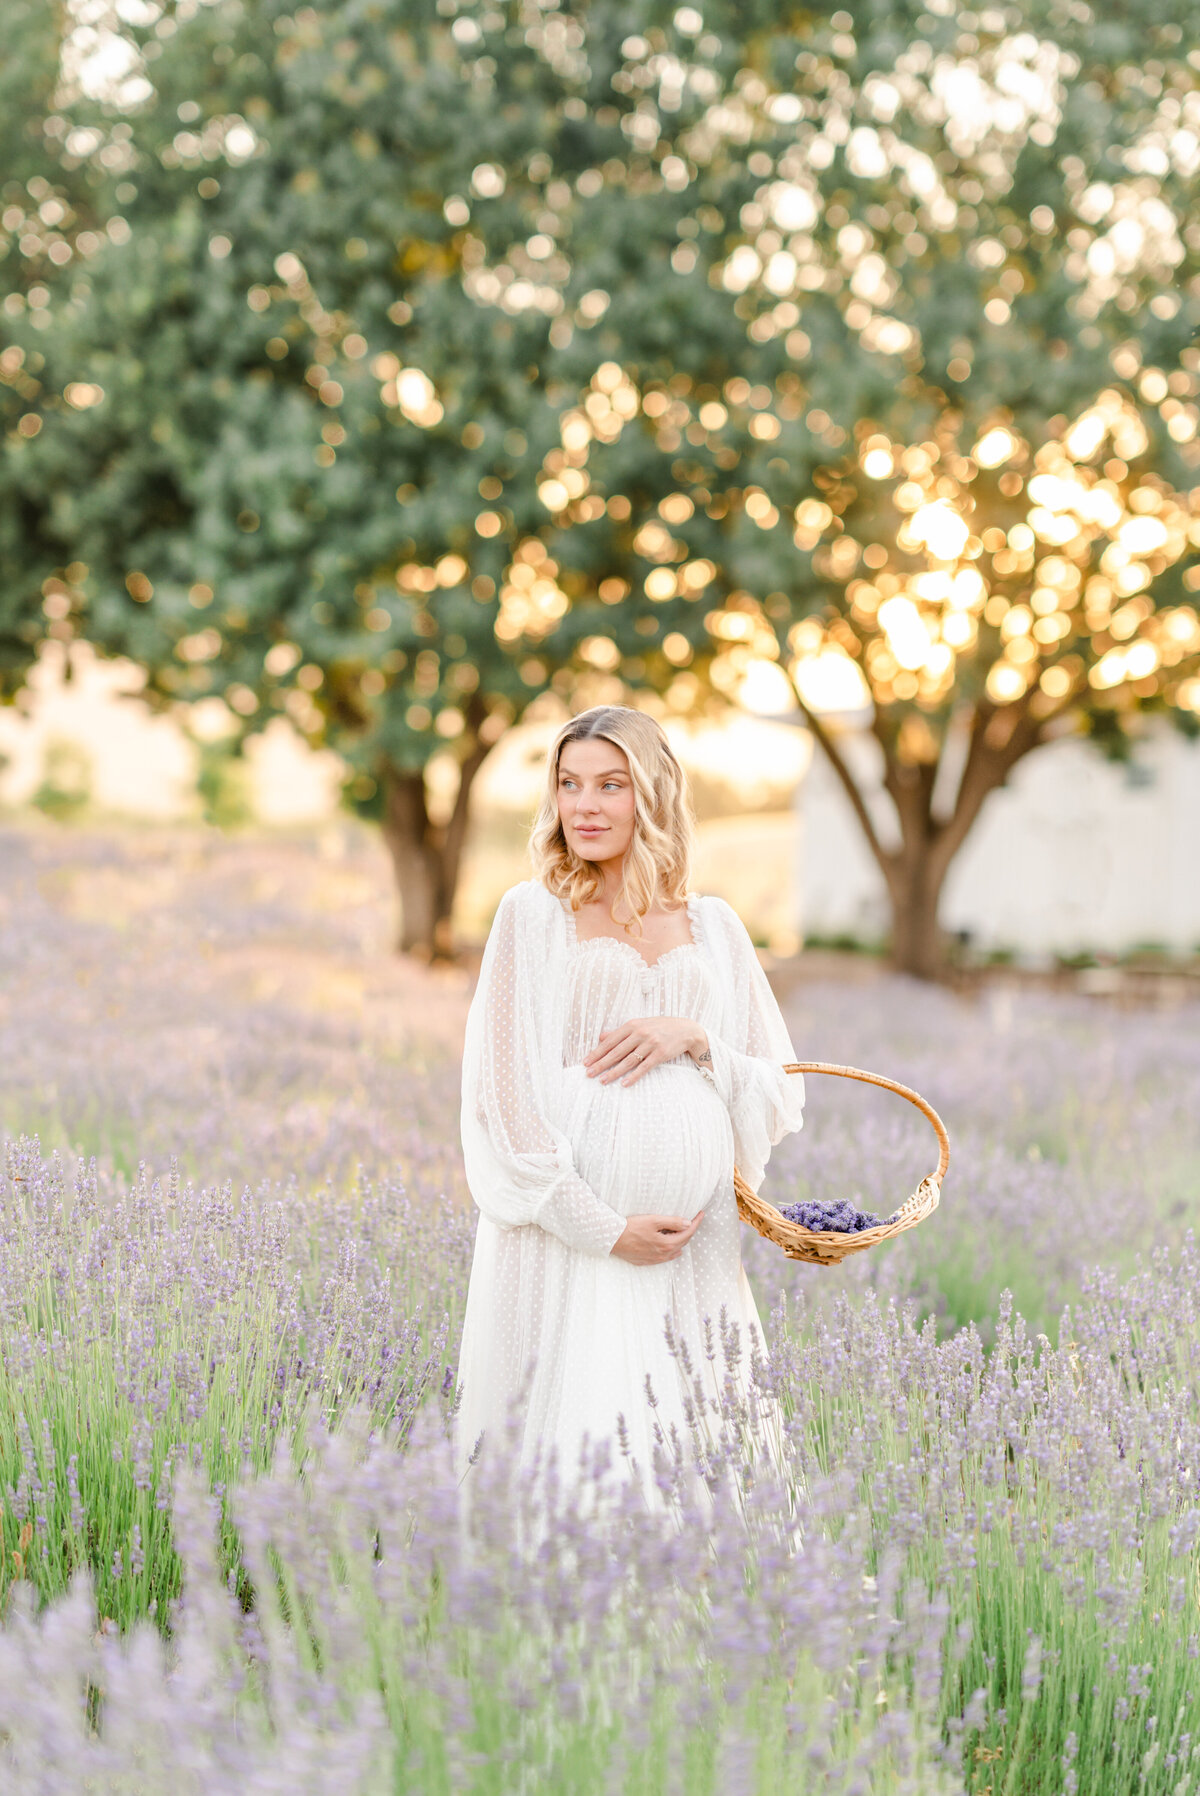 A maternity session photographed by Bay Area Photographer, Light Livin Photography shows an expecting mother standing and caressing her baby bump in a field of lavender.